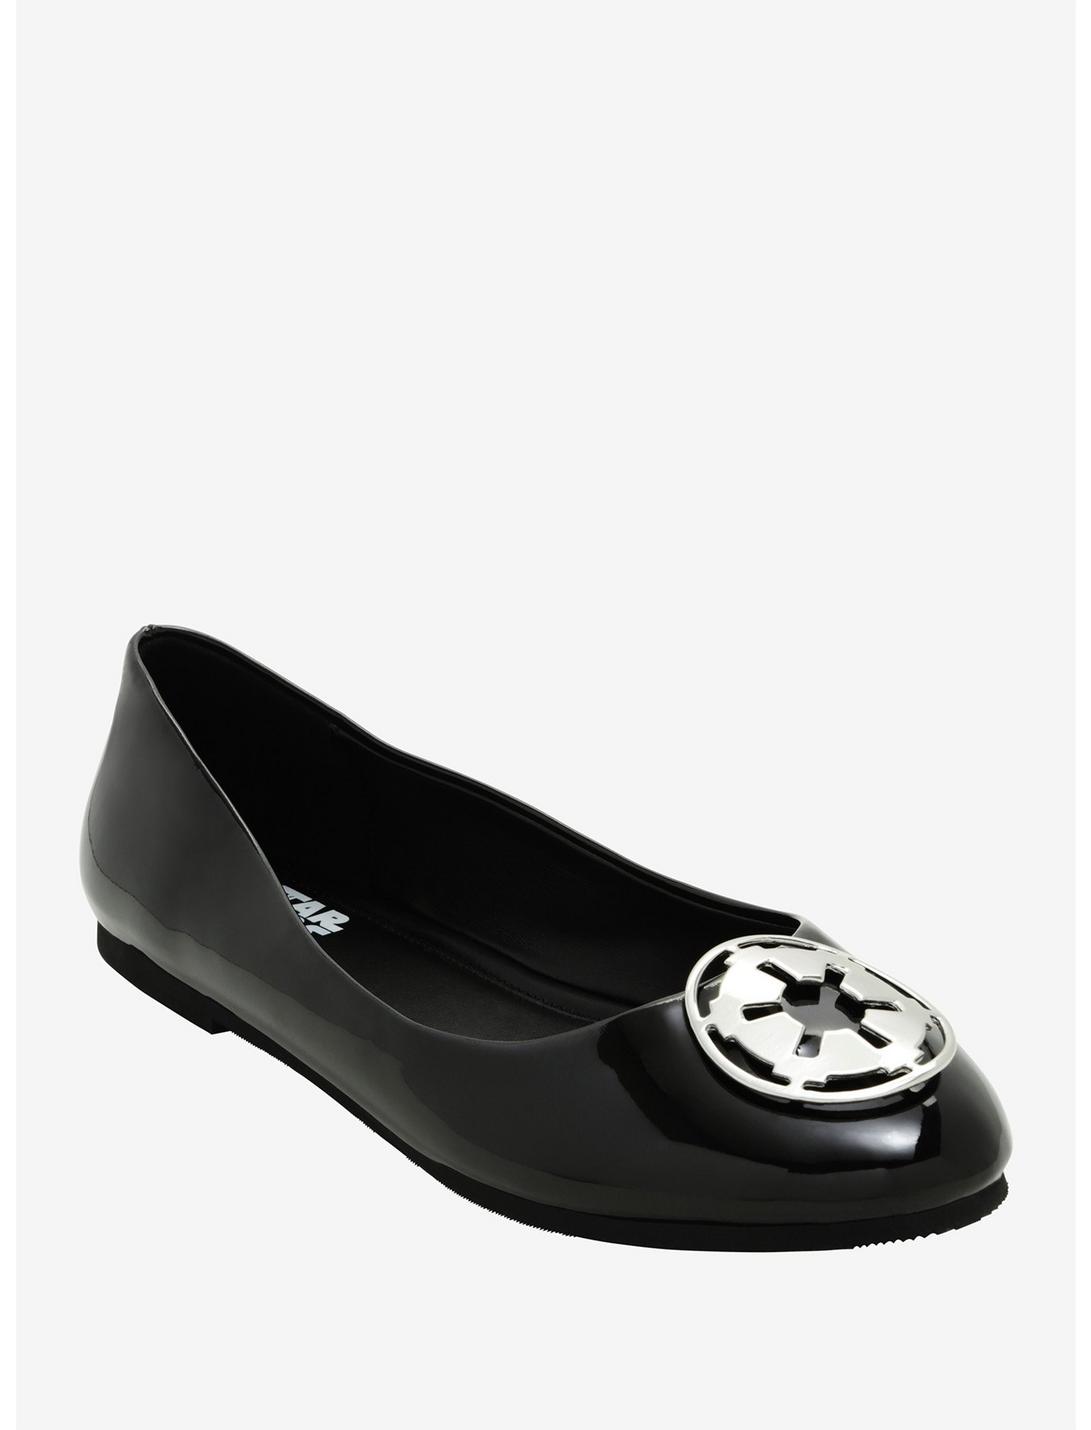 Plus Size Star Wars Galactic Empire Patent Leather Flats Her Universe Exclusive, BLACK, hi-res